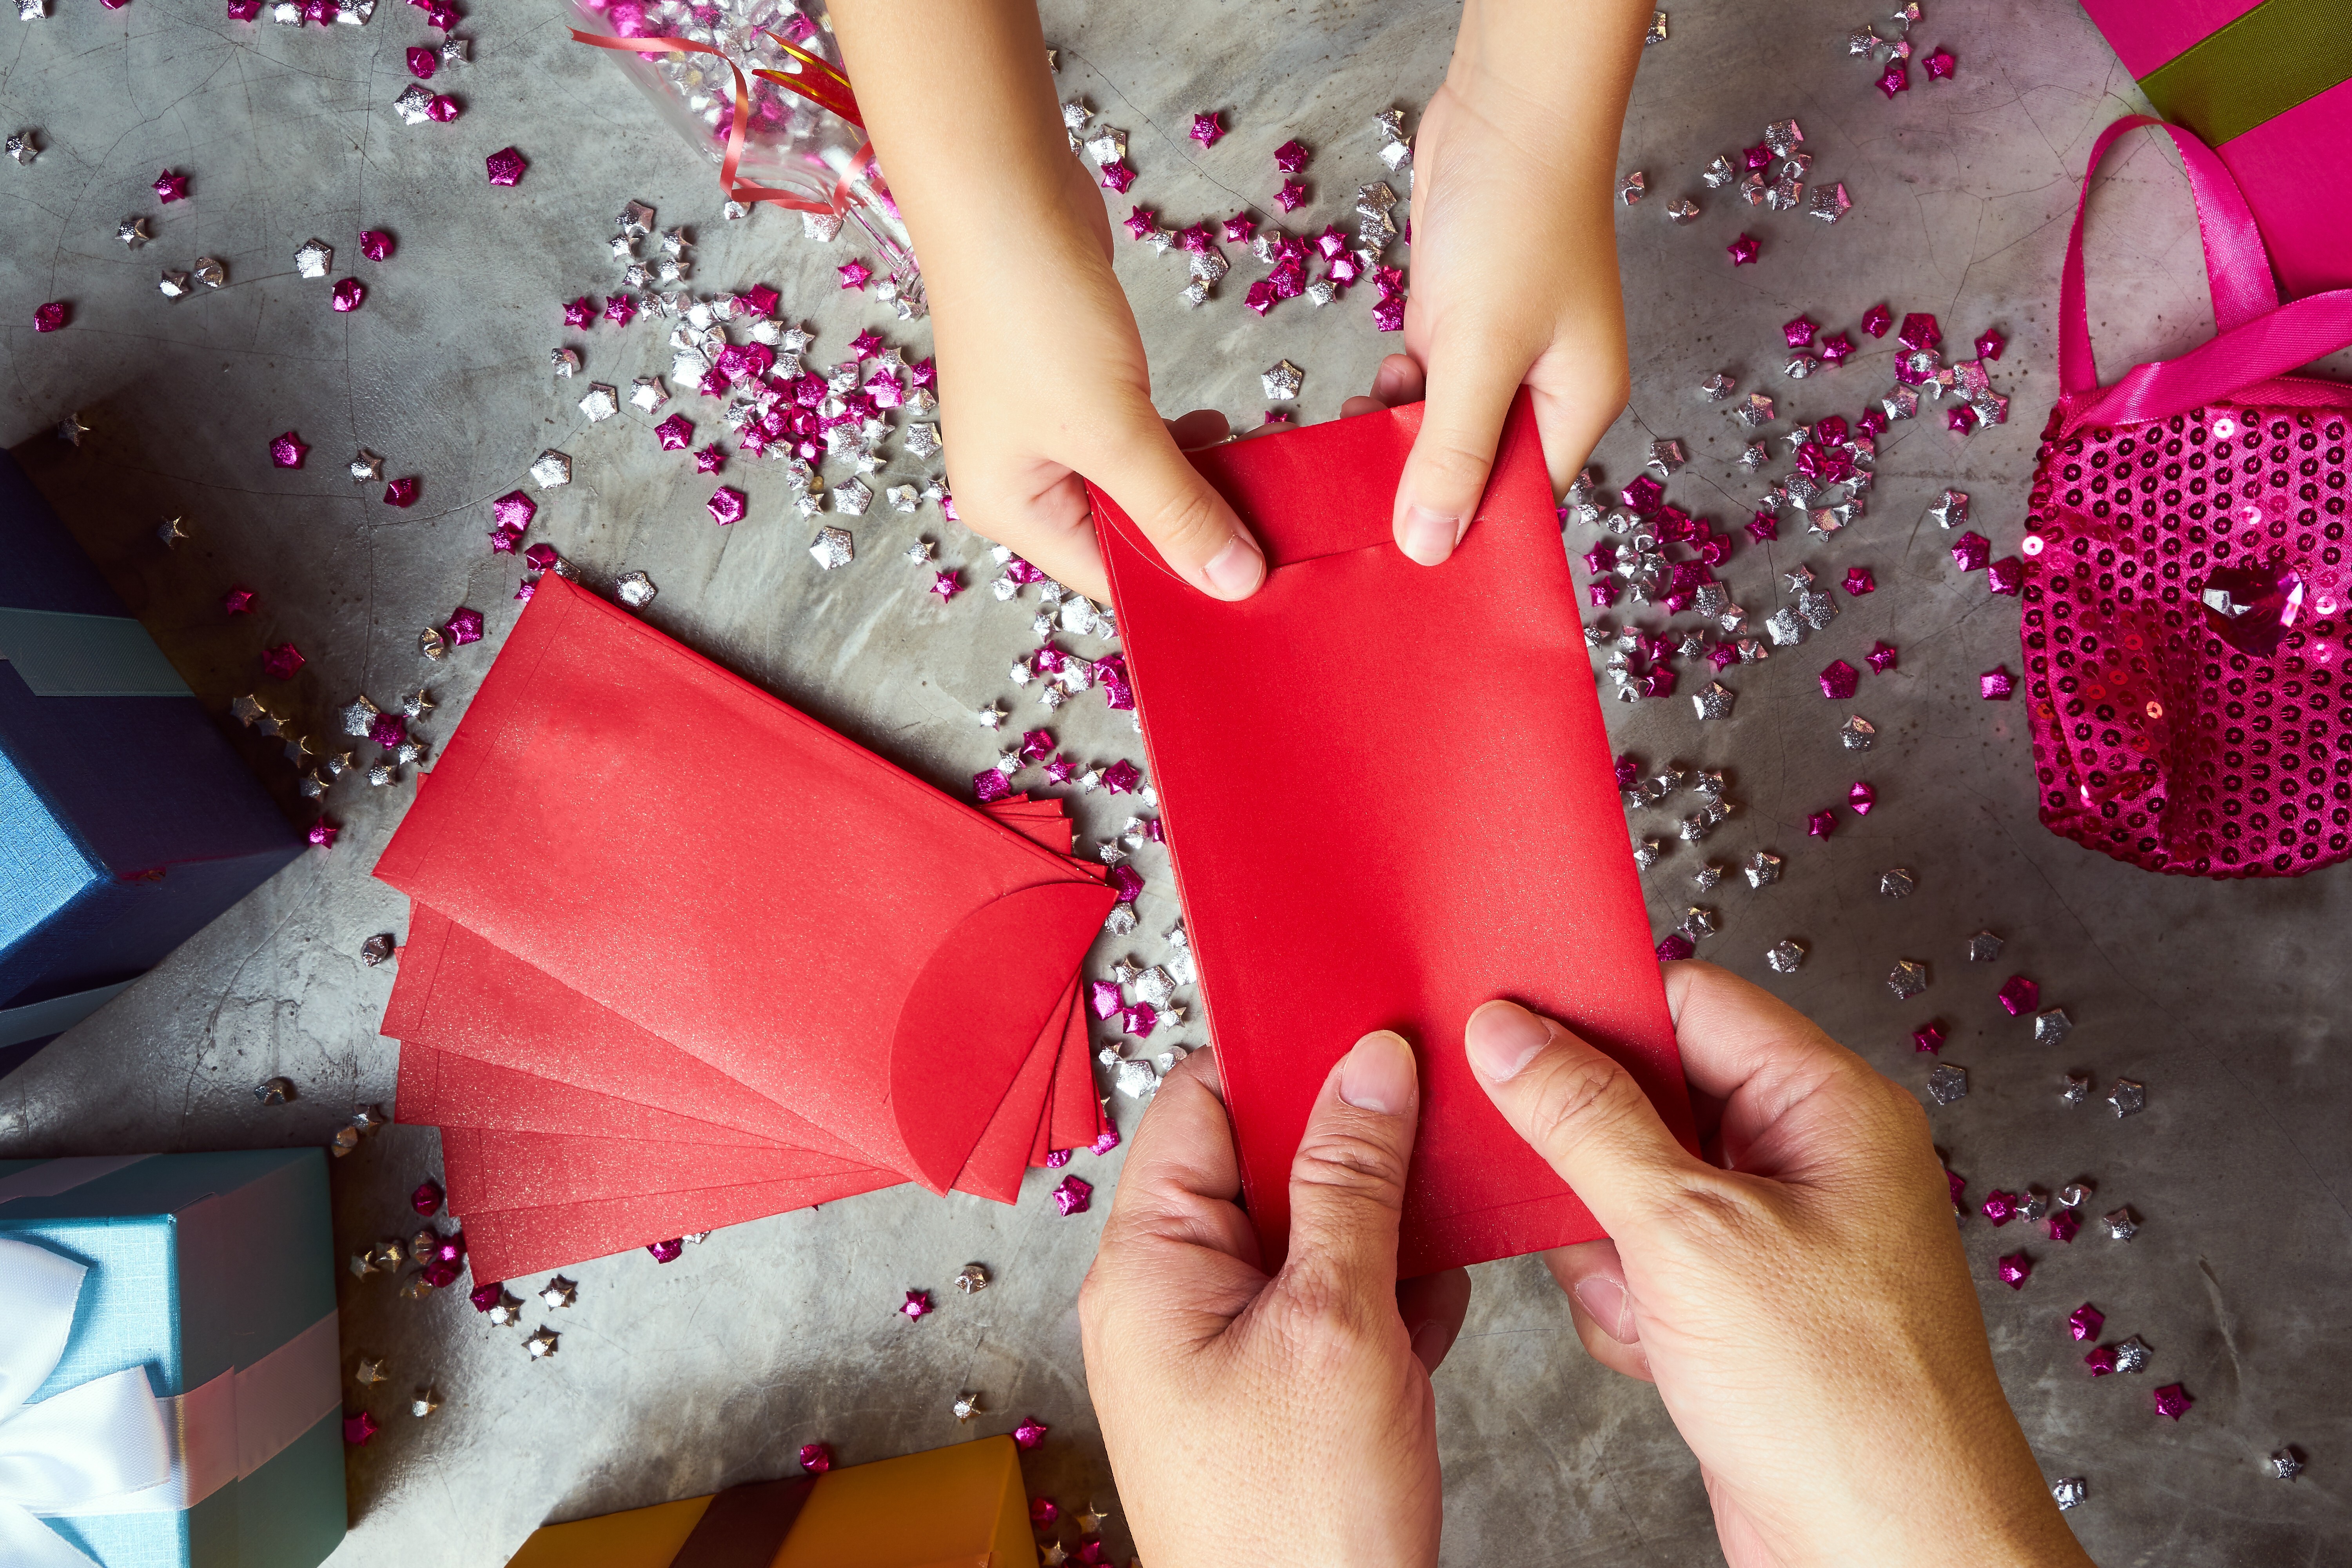 Do you think teens should donate some, or all, of their red packet money?